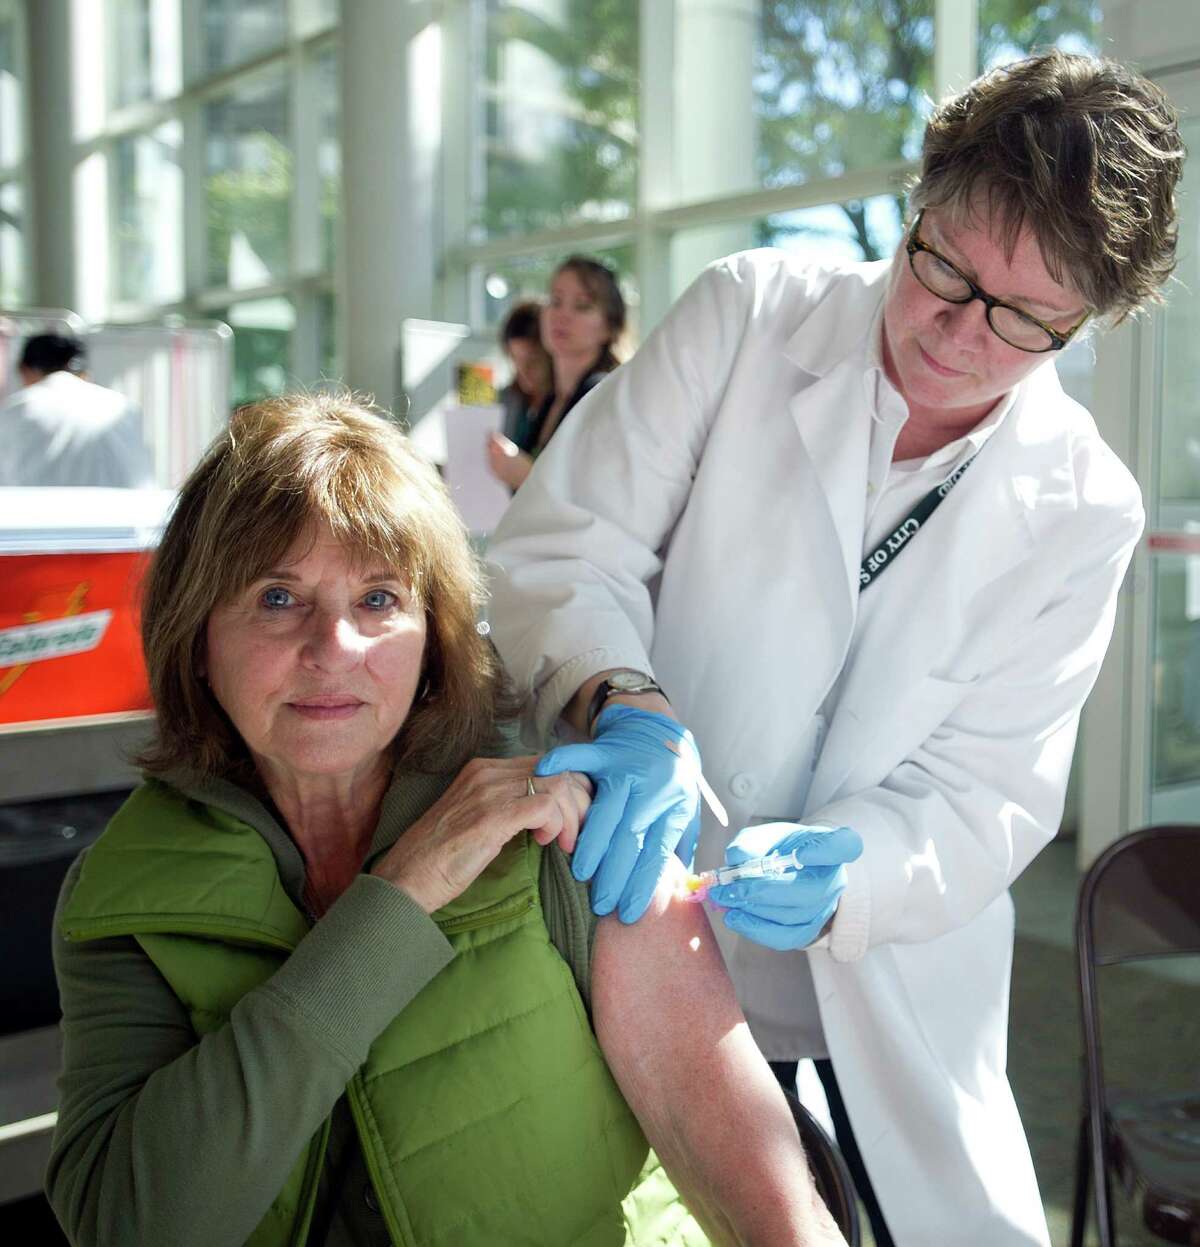 Anita Barkan gets a flu shot from Maryalice Flynn at Government Center on Tuesday, Sept. 24, 2013.